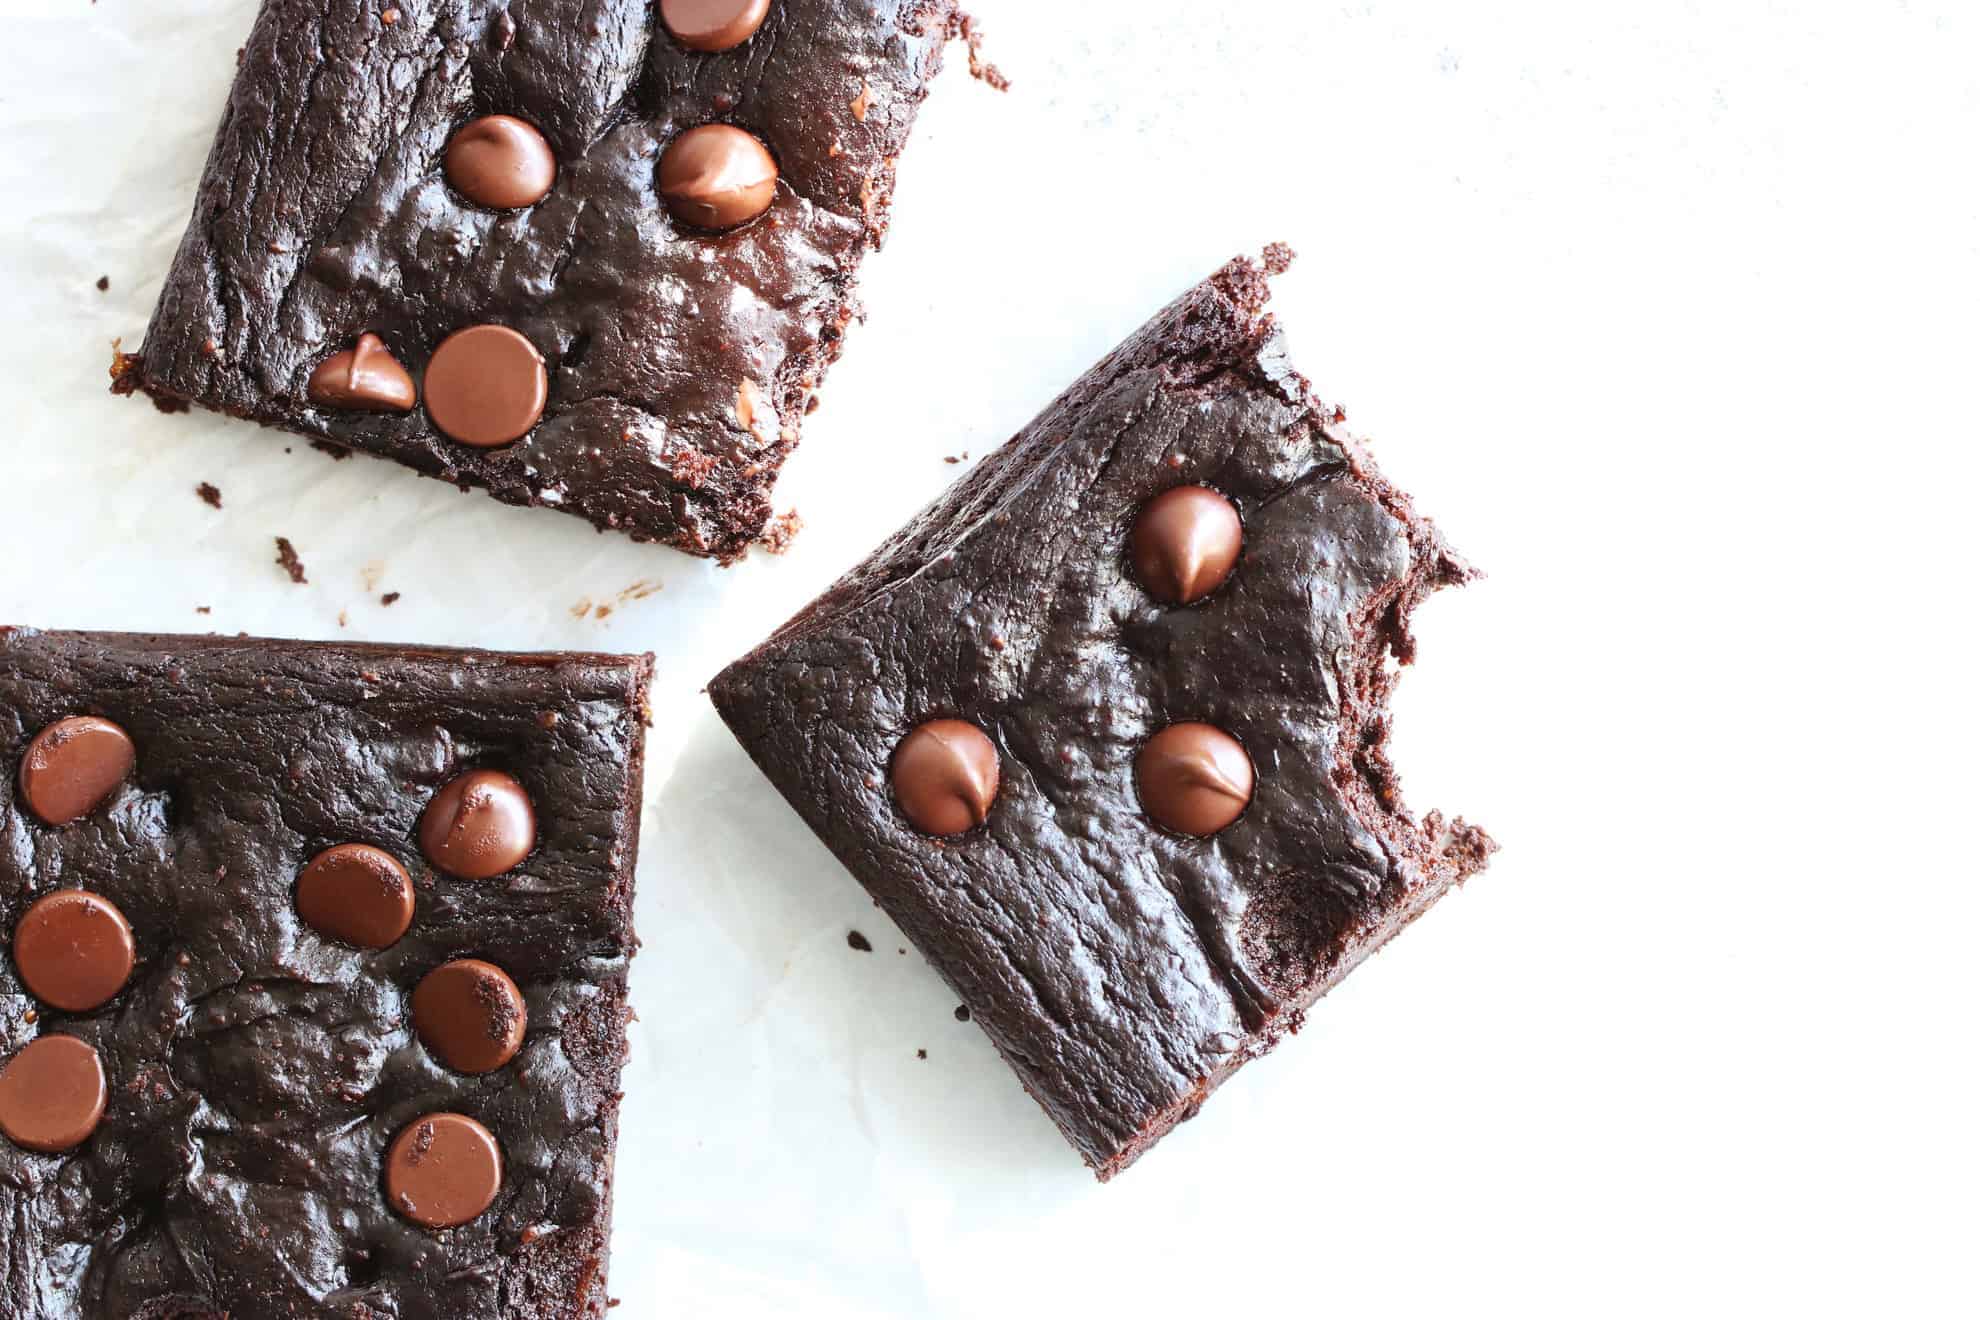 This is an overhead image of dark chocolate brownies with chocolate chips on the tops. The brownies are on a white surface and one brownie square has a bite taken out of it. 